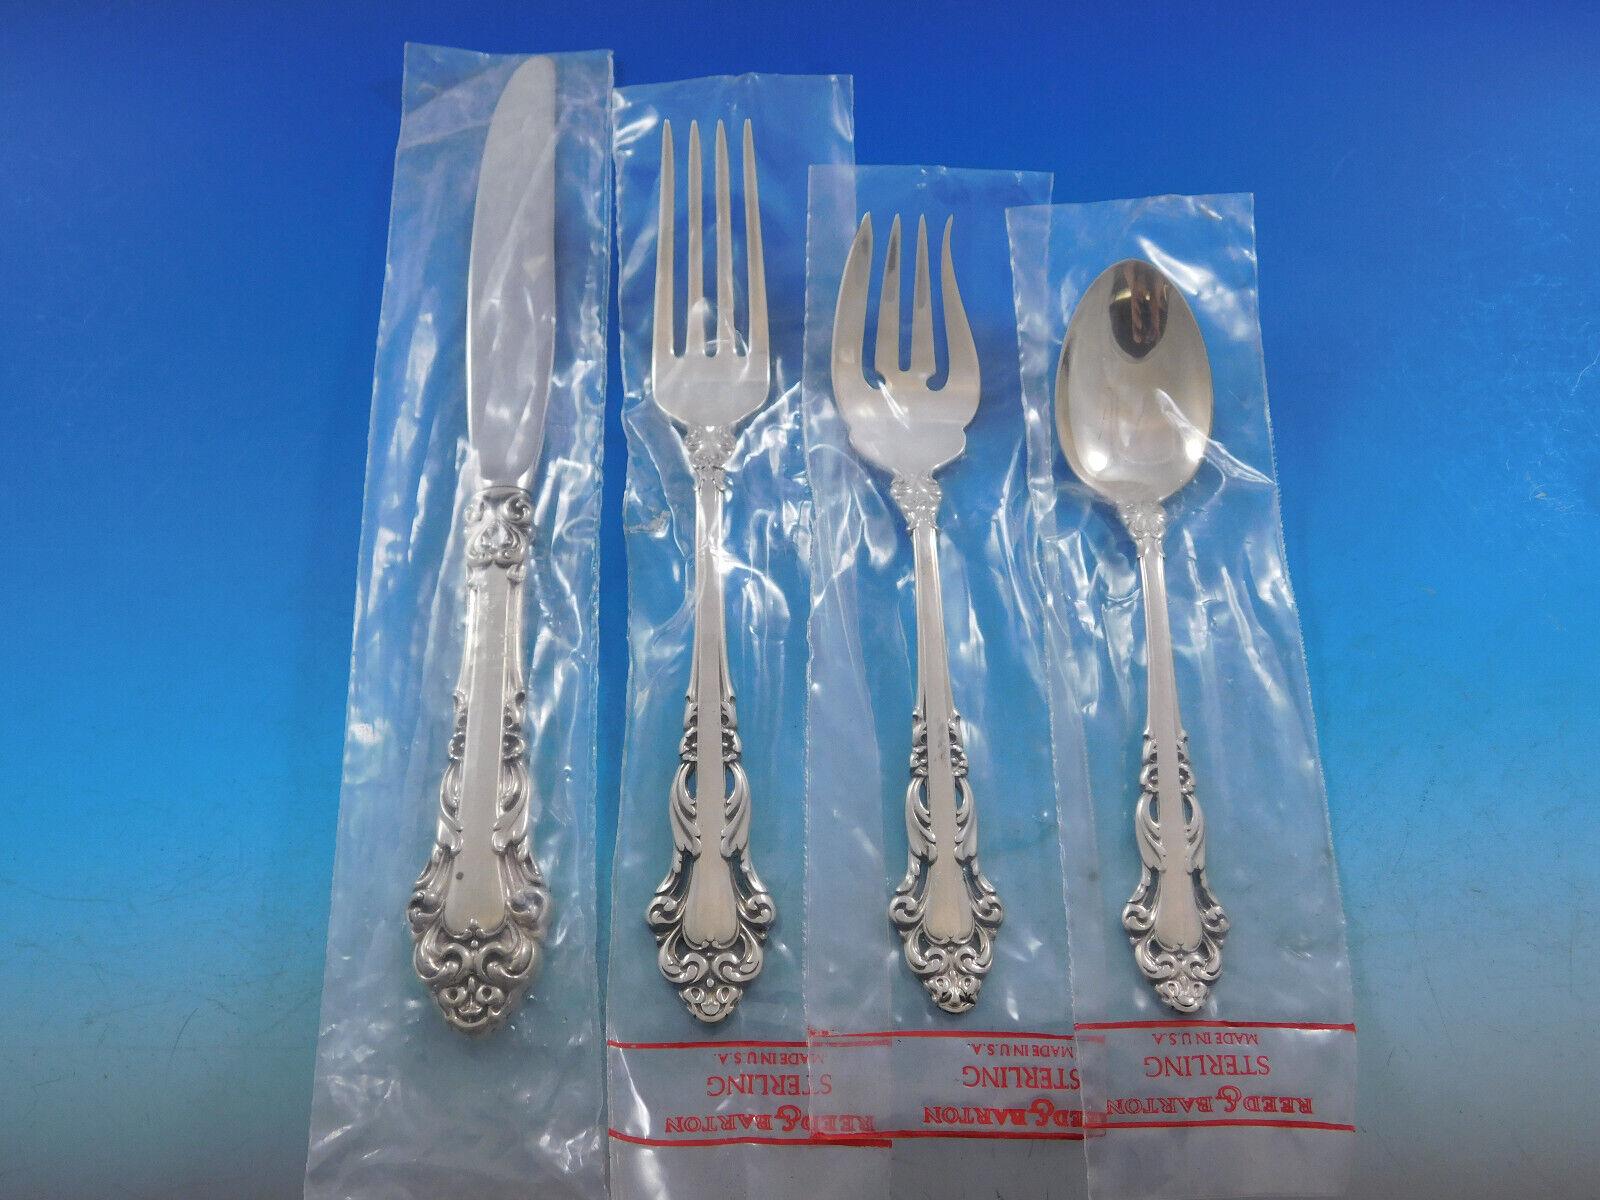 New, unused Grande Renaissance by Reed & Barton Sterling Silver flatware set - 48 pieces. This set includes:

12 Knives, 9